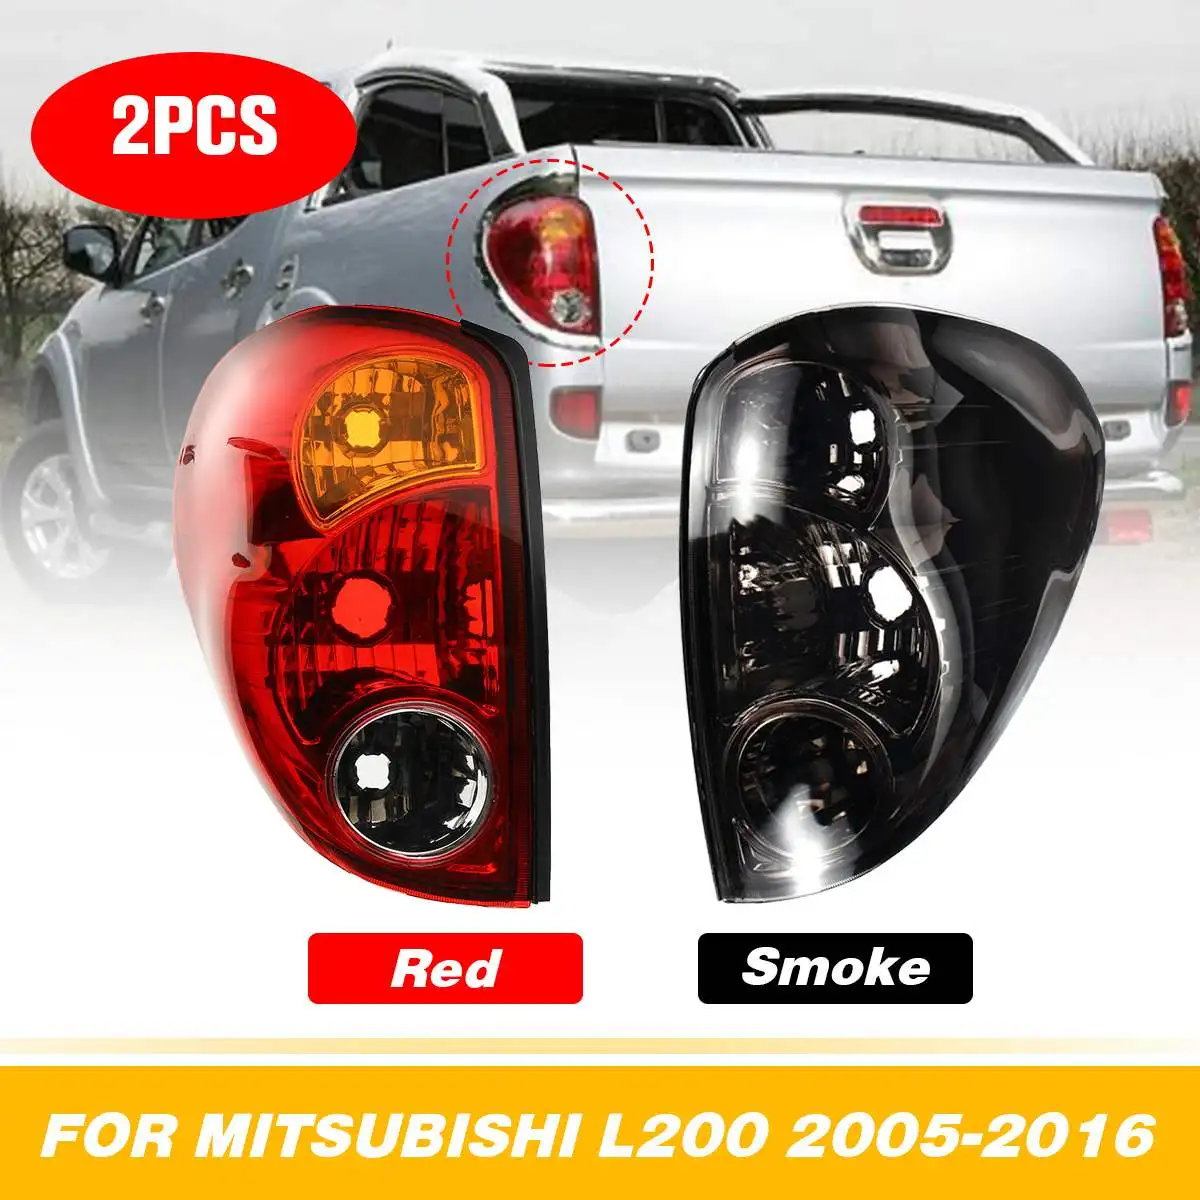 

for Mitsubishi L200 Triton Colt 2005-2016 Pickup 1 Pair Car Smoke Taillights Rear Lamp Tail Lights Brake With Wire Replacement